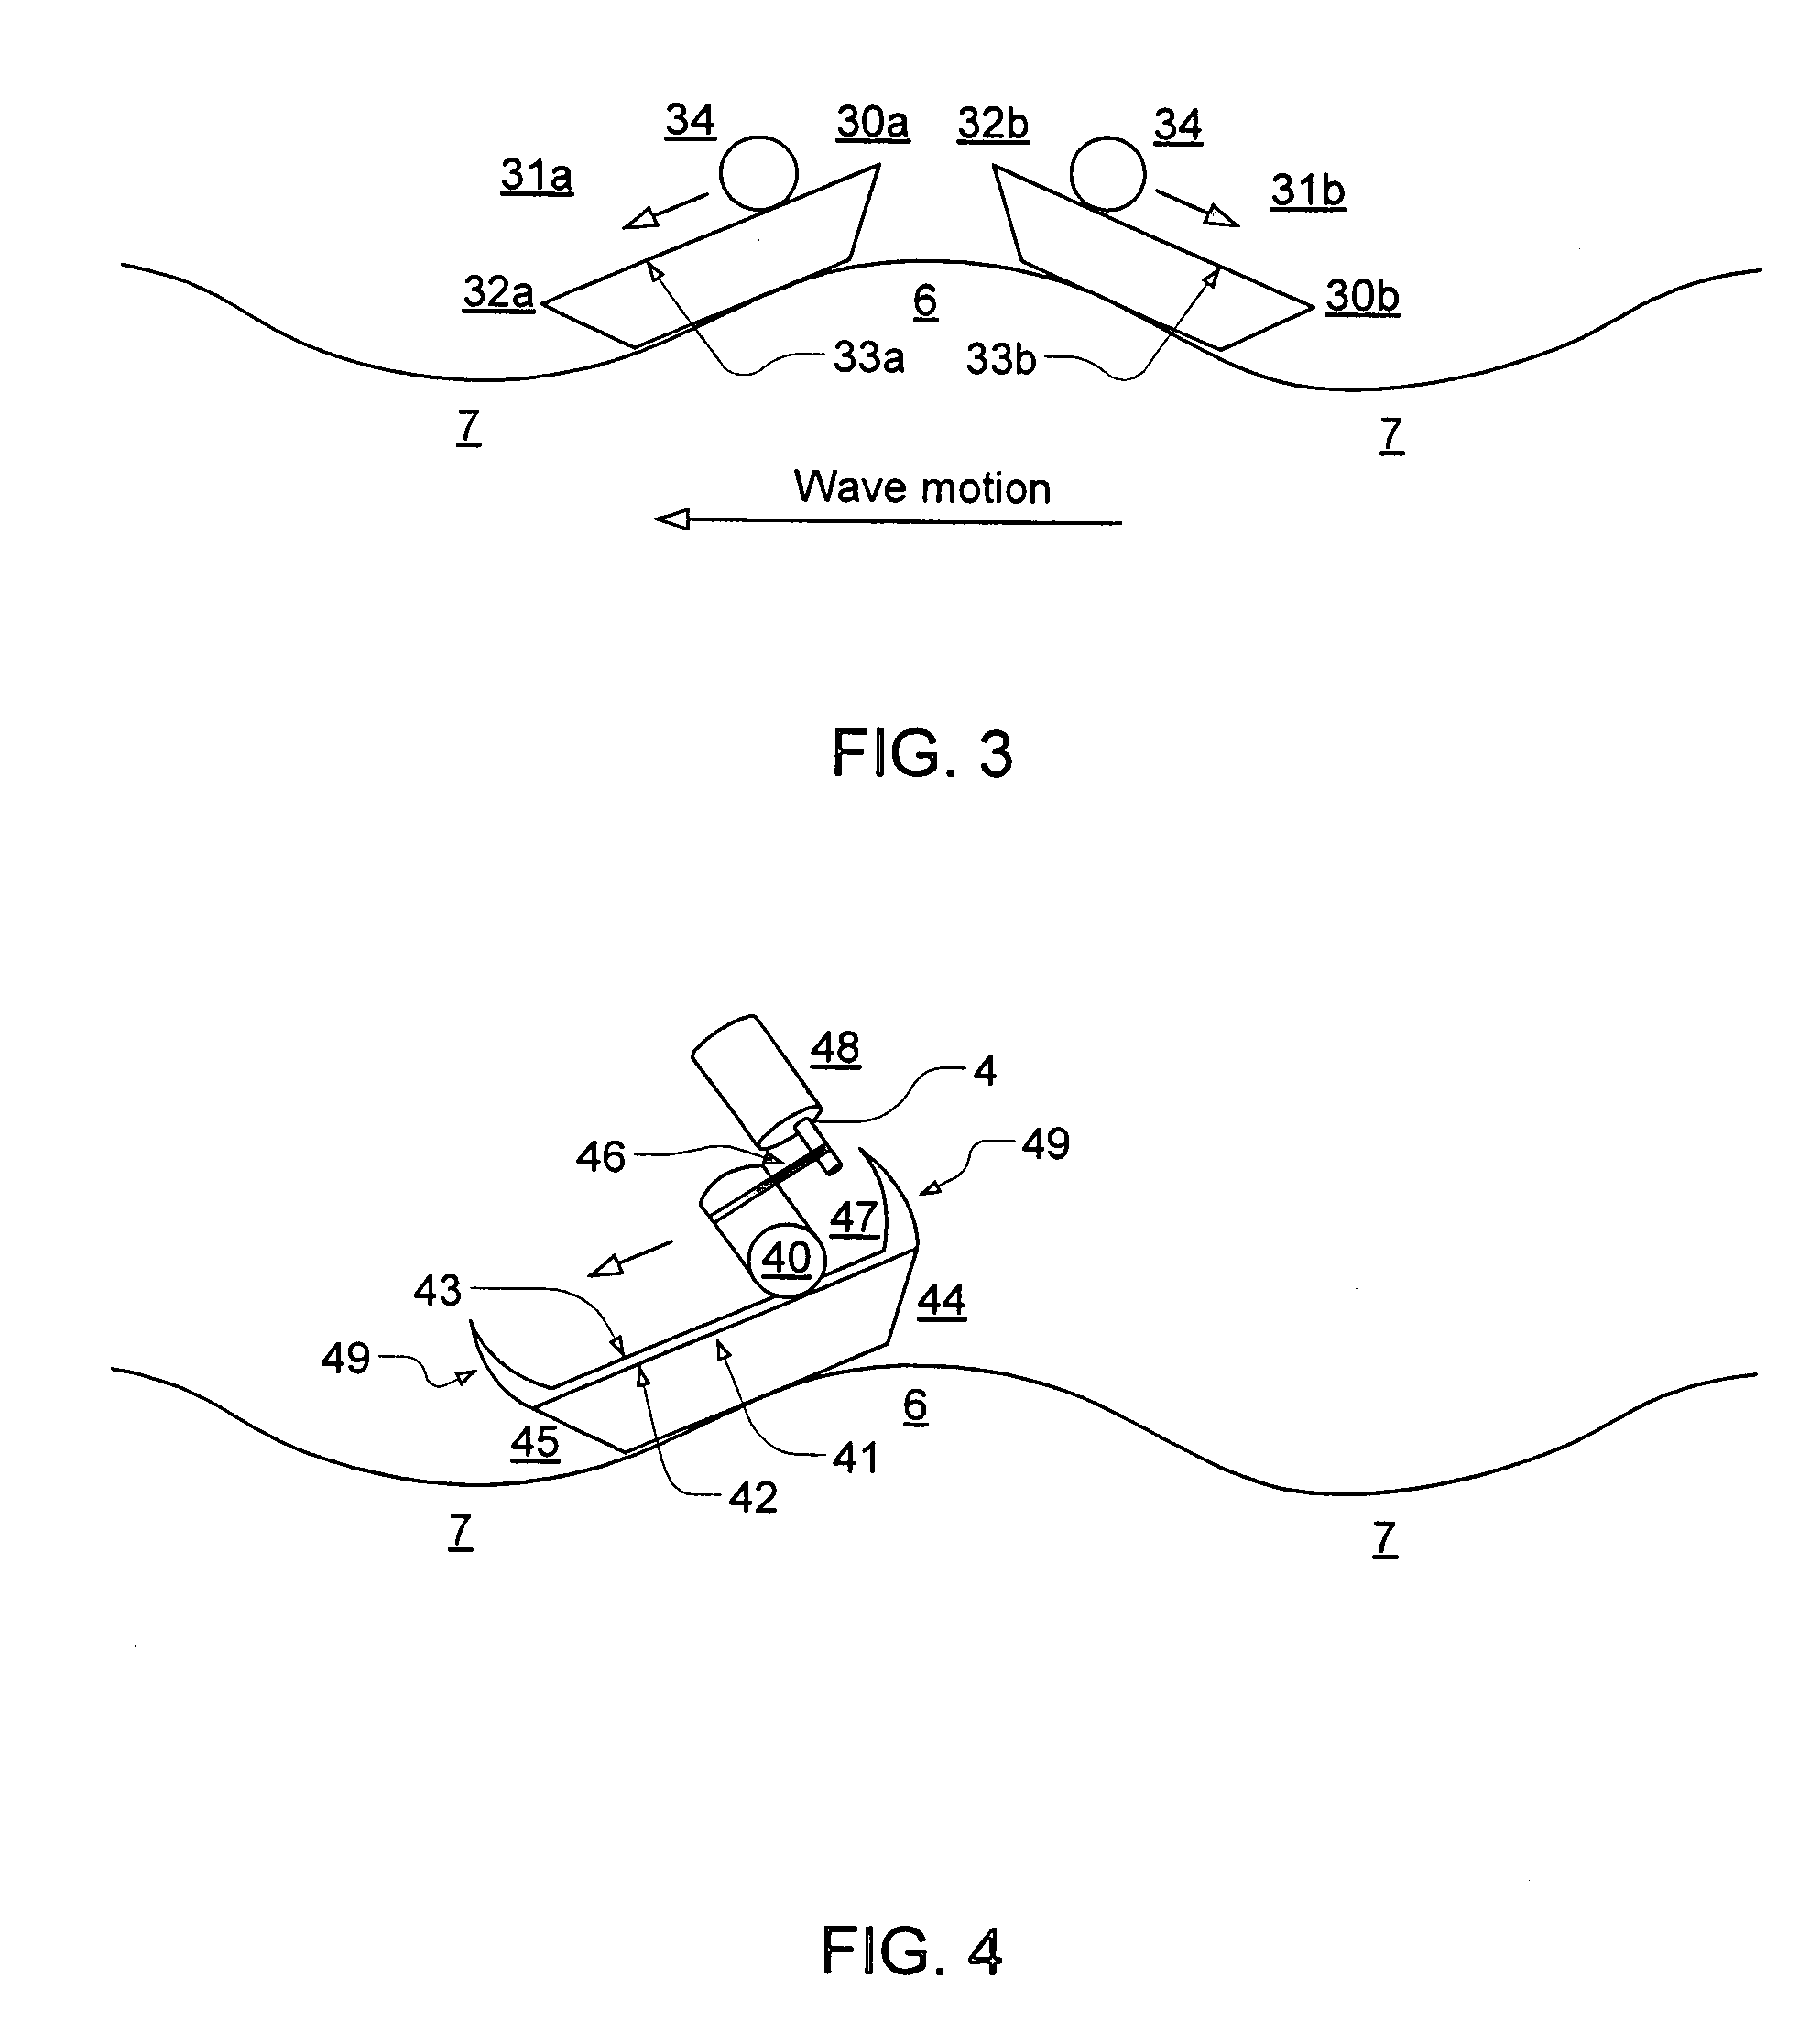 System for producing electricity through the action of waves on floating platforms